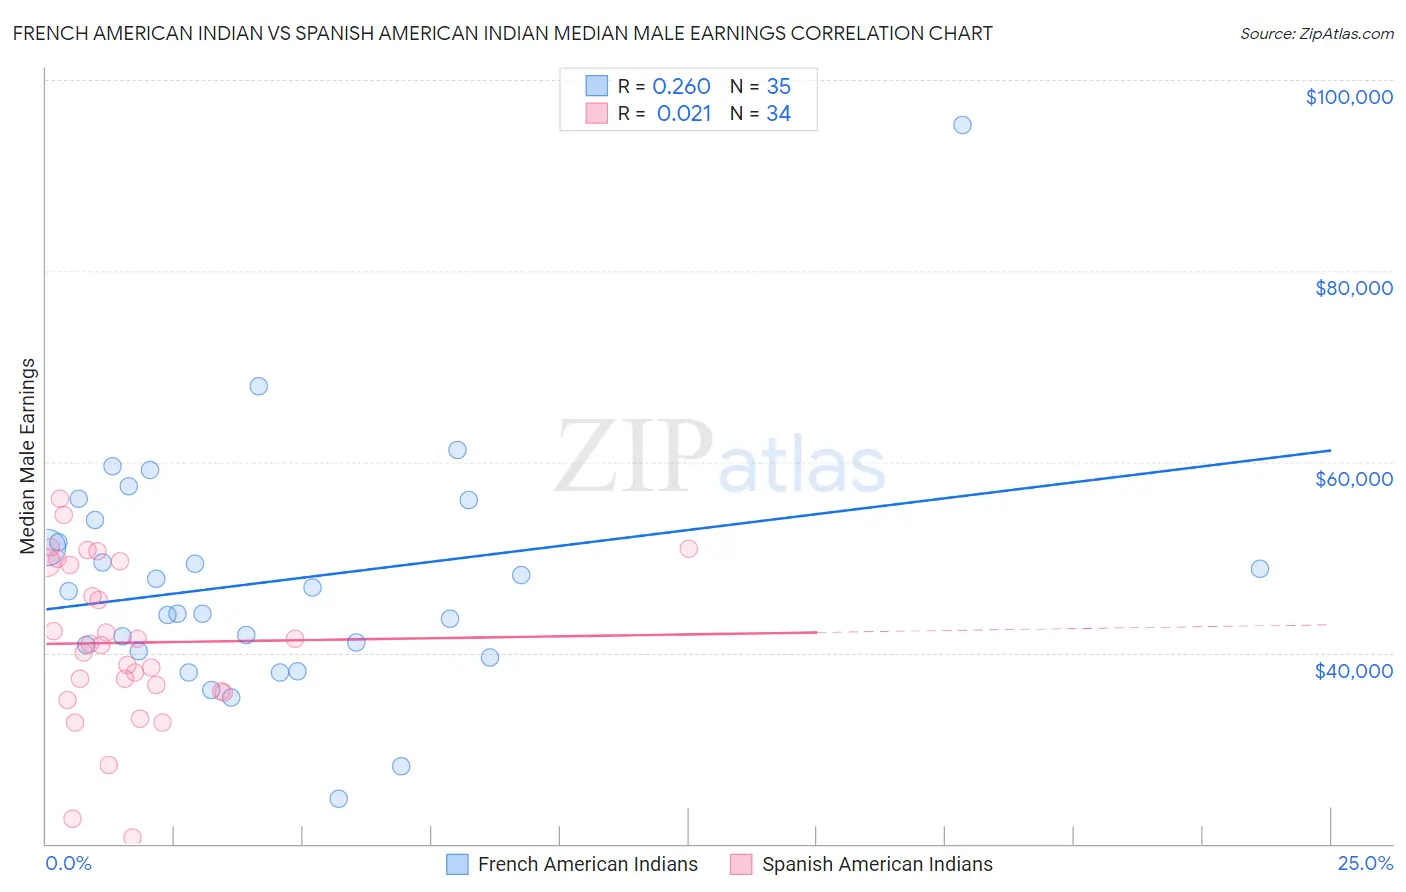 French American Indian vs Spanish American Indian Median Male Earnings